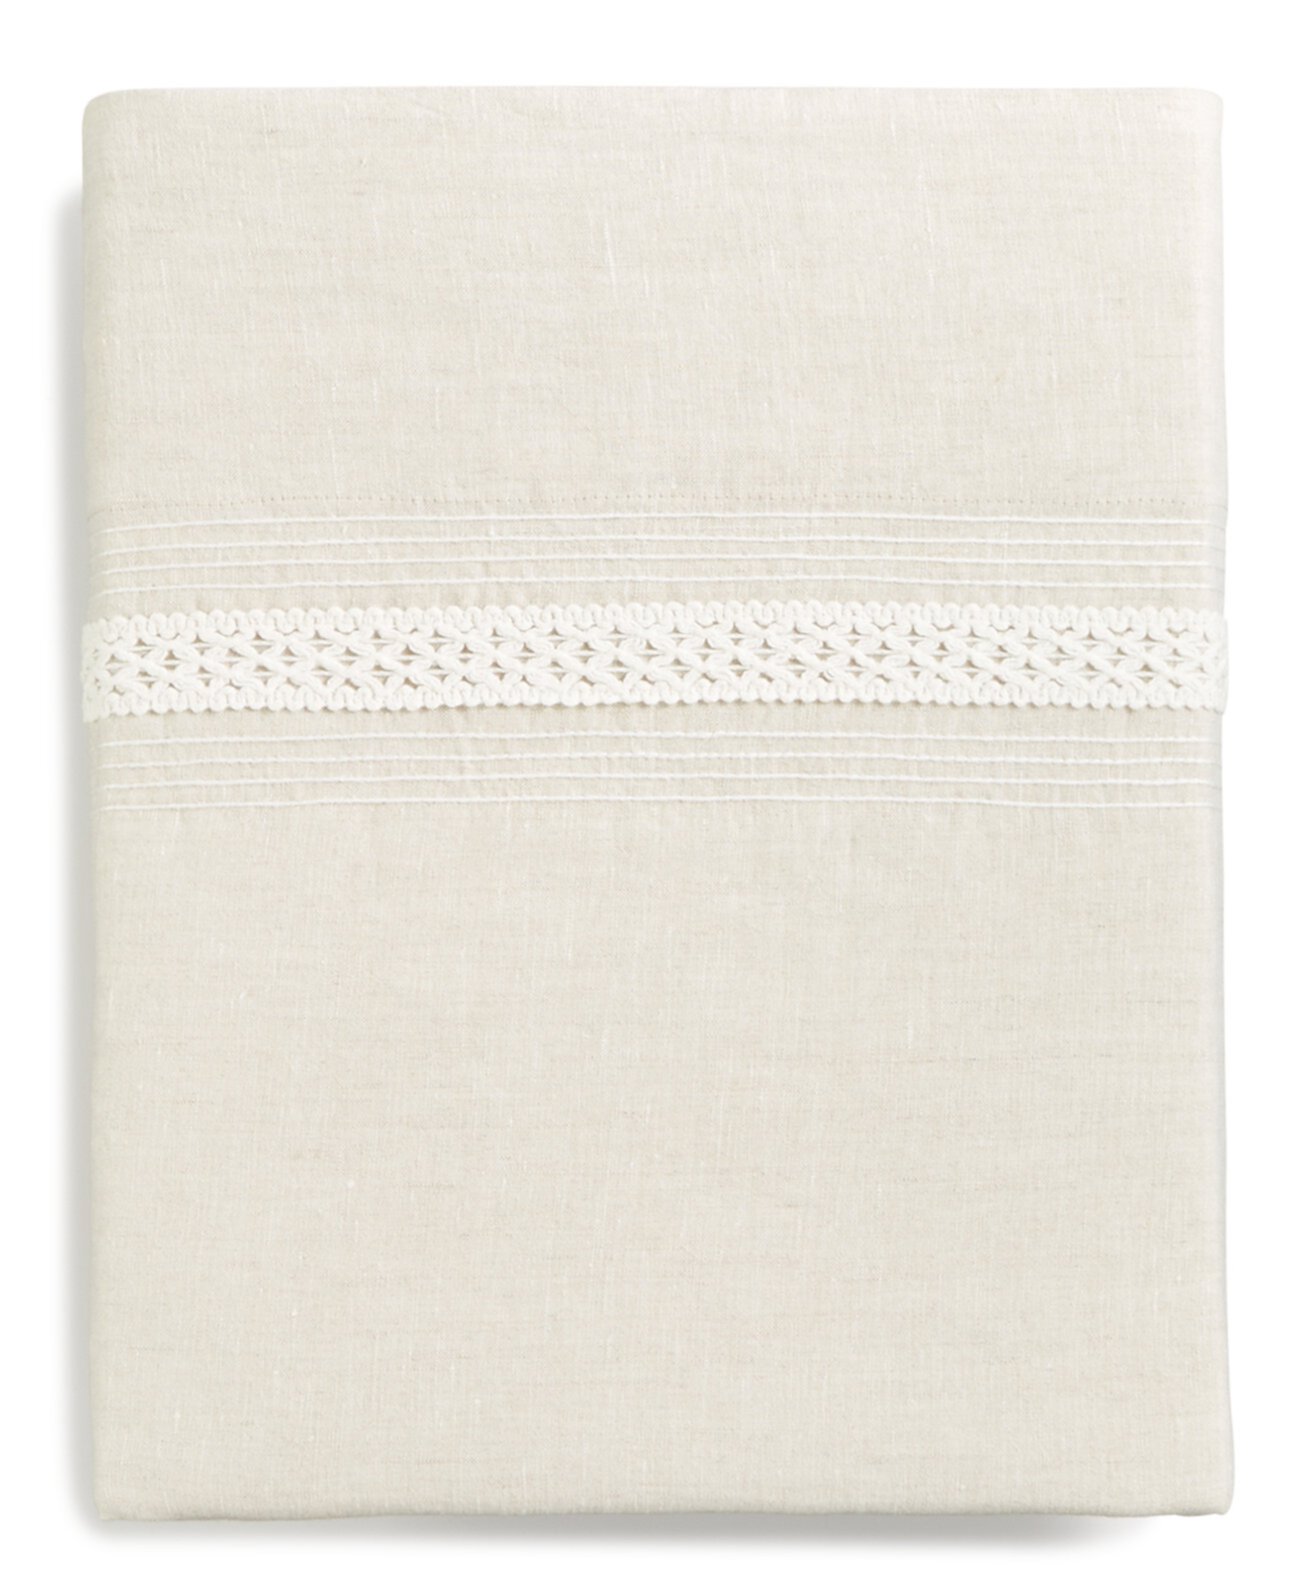 Madison Hemstitch Queen Flat Sheet, Created for Macy's Hotel Collection